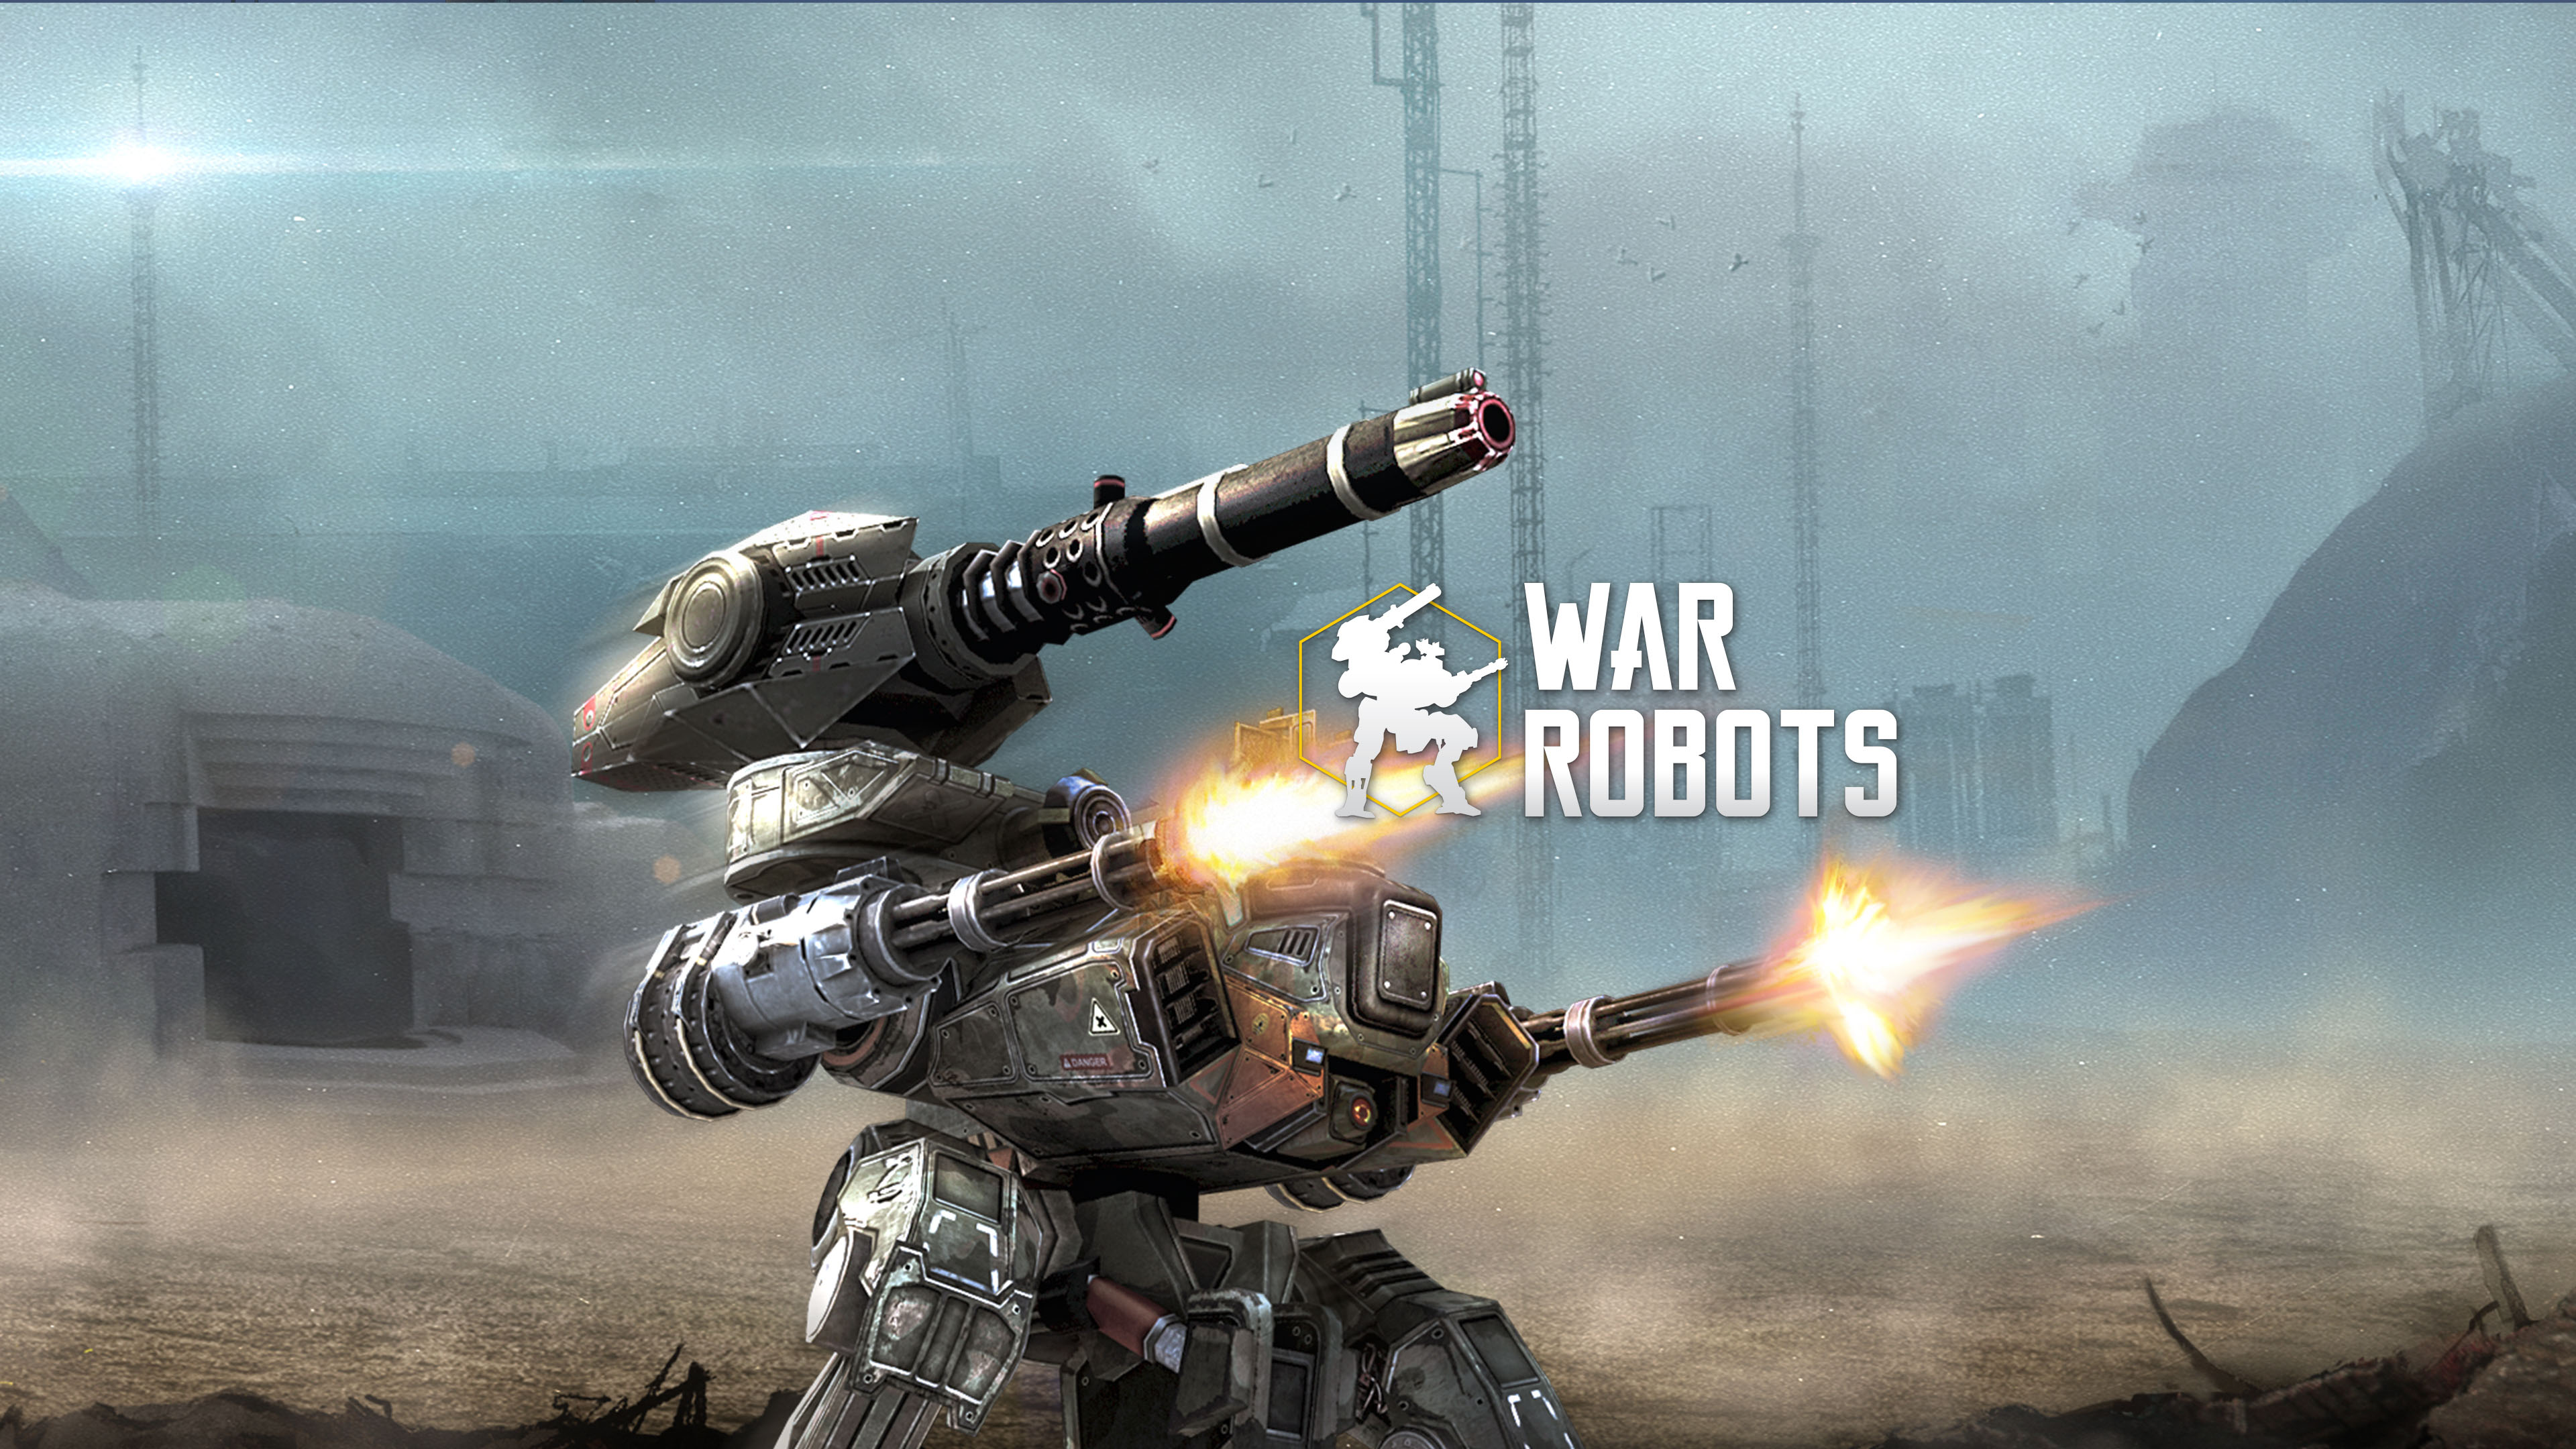 Here Are Some More I Found In The Press Kit - Cool War Robots Backgrounds , HD Wallpaper & Backgrounds